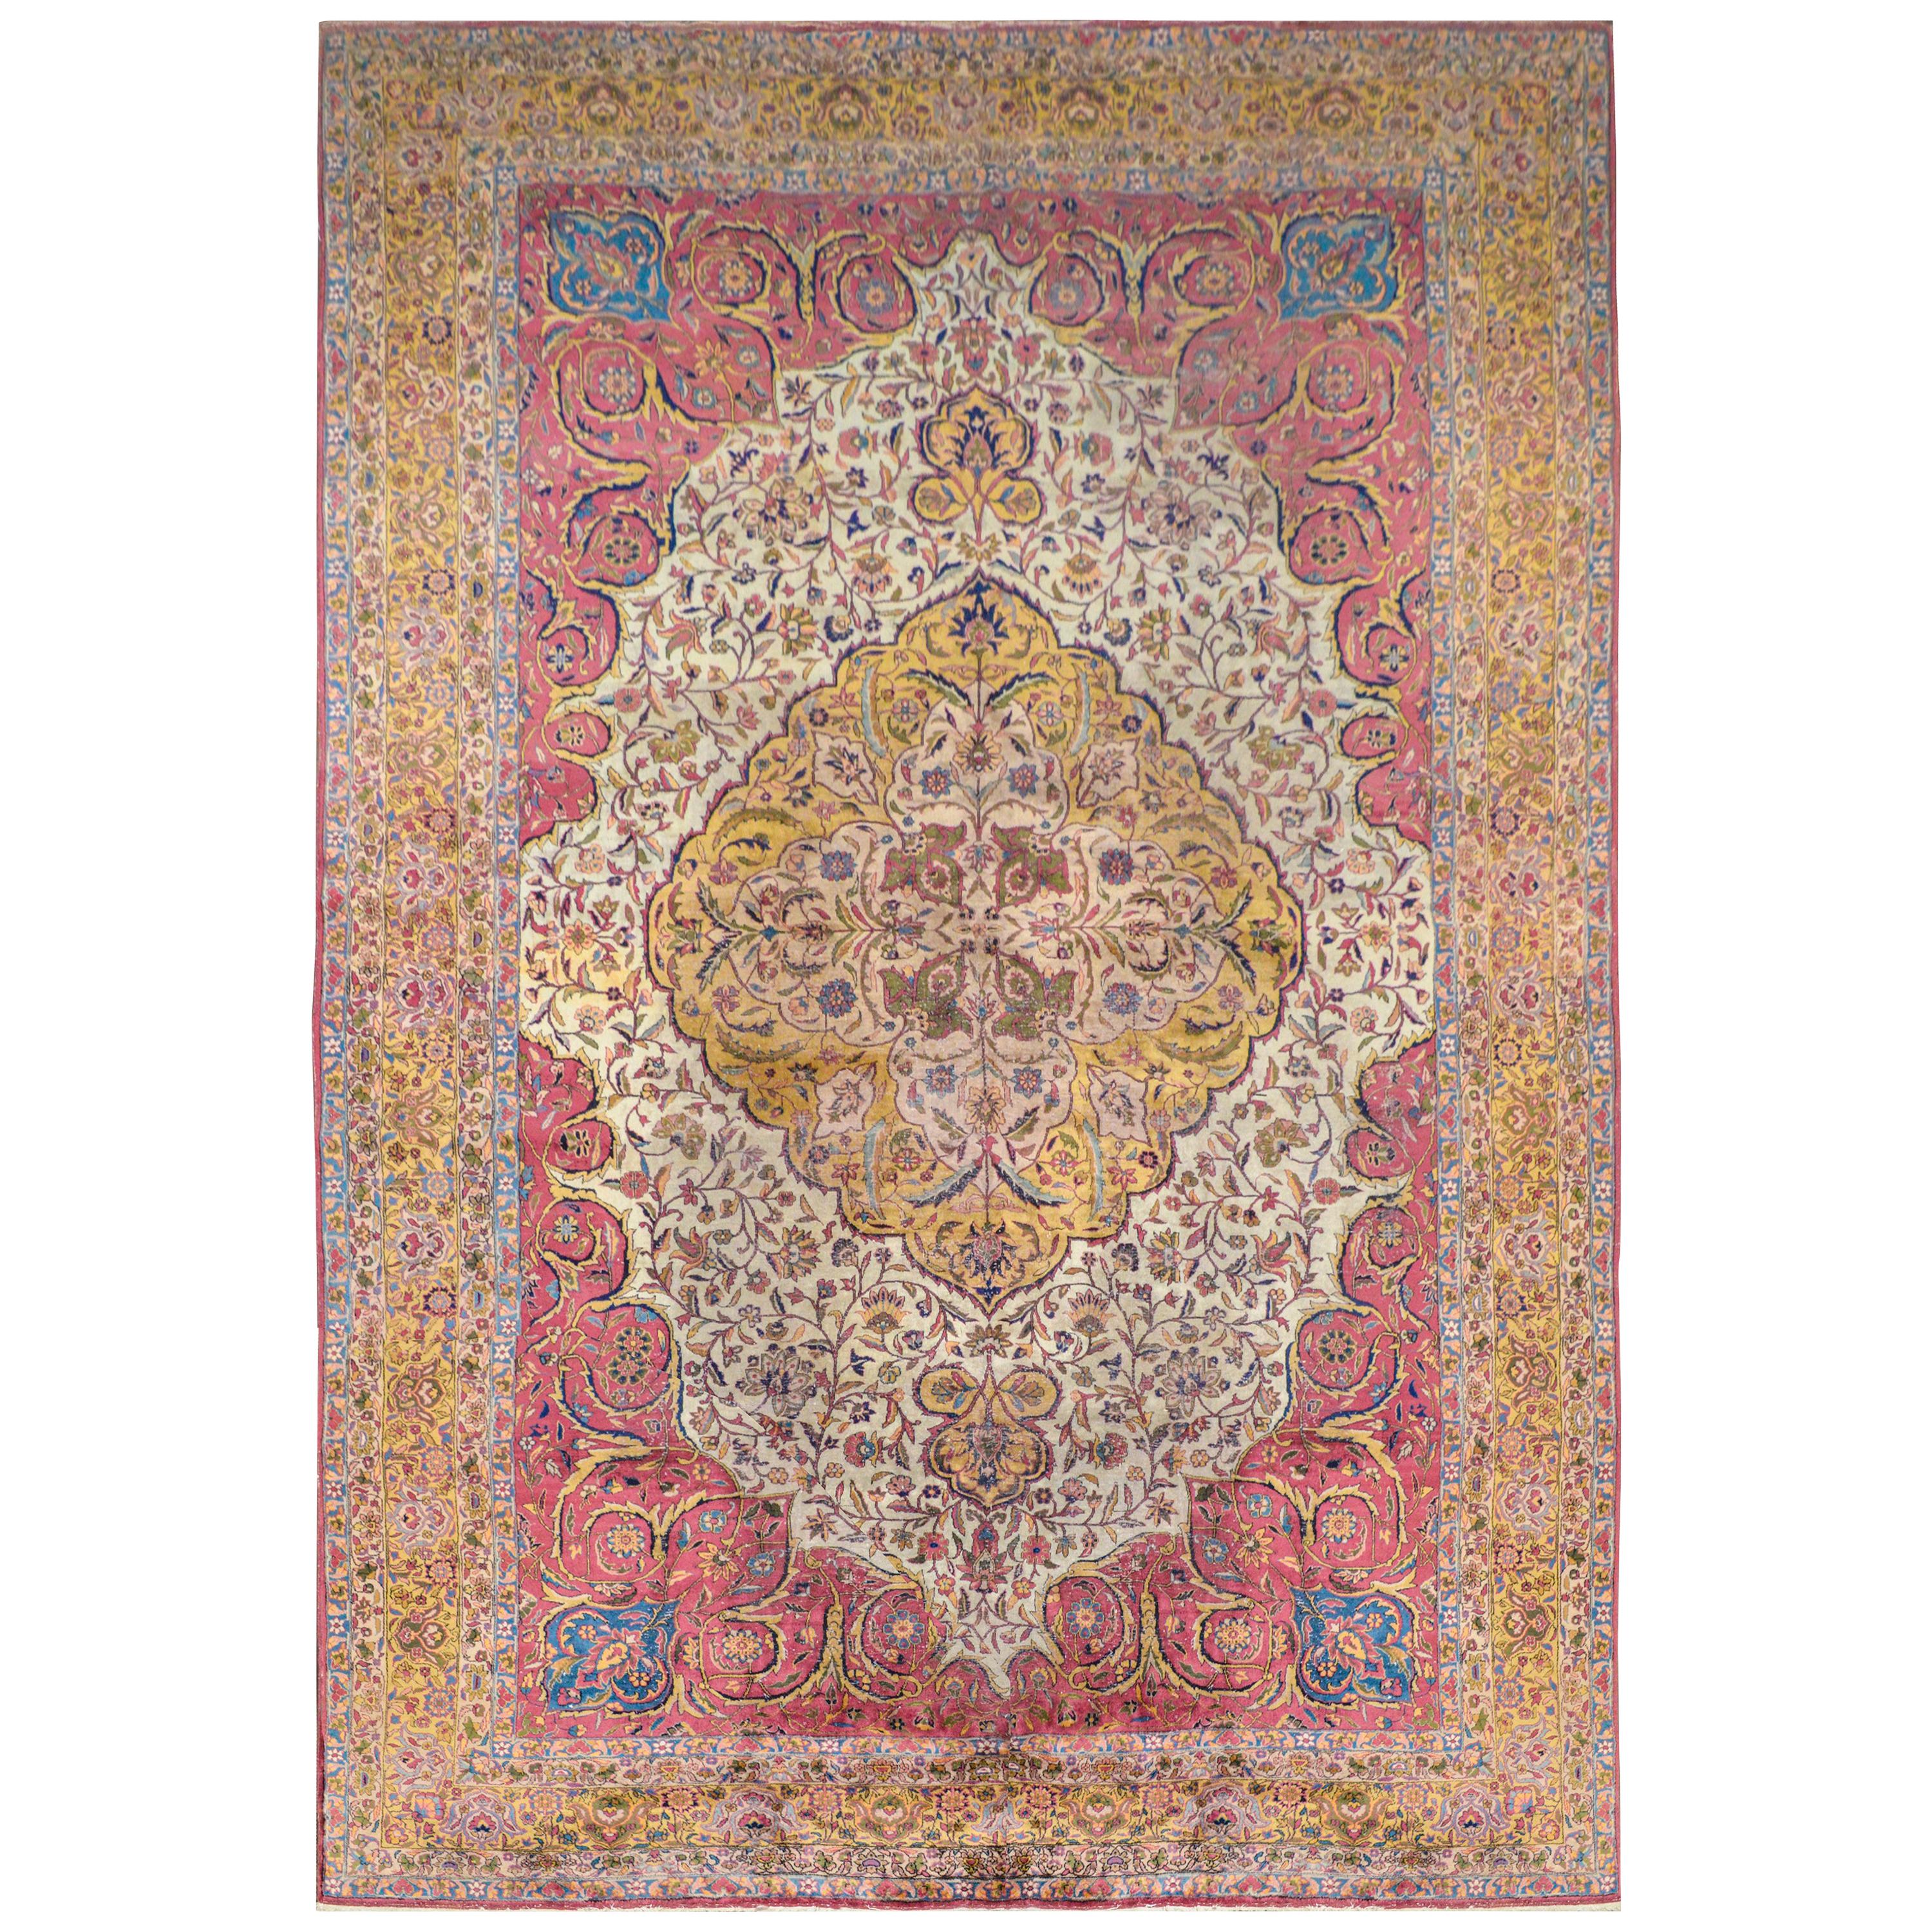 Outstanding Early 20th Century Agra Rug